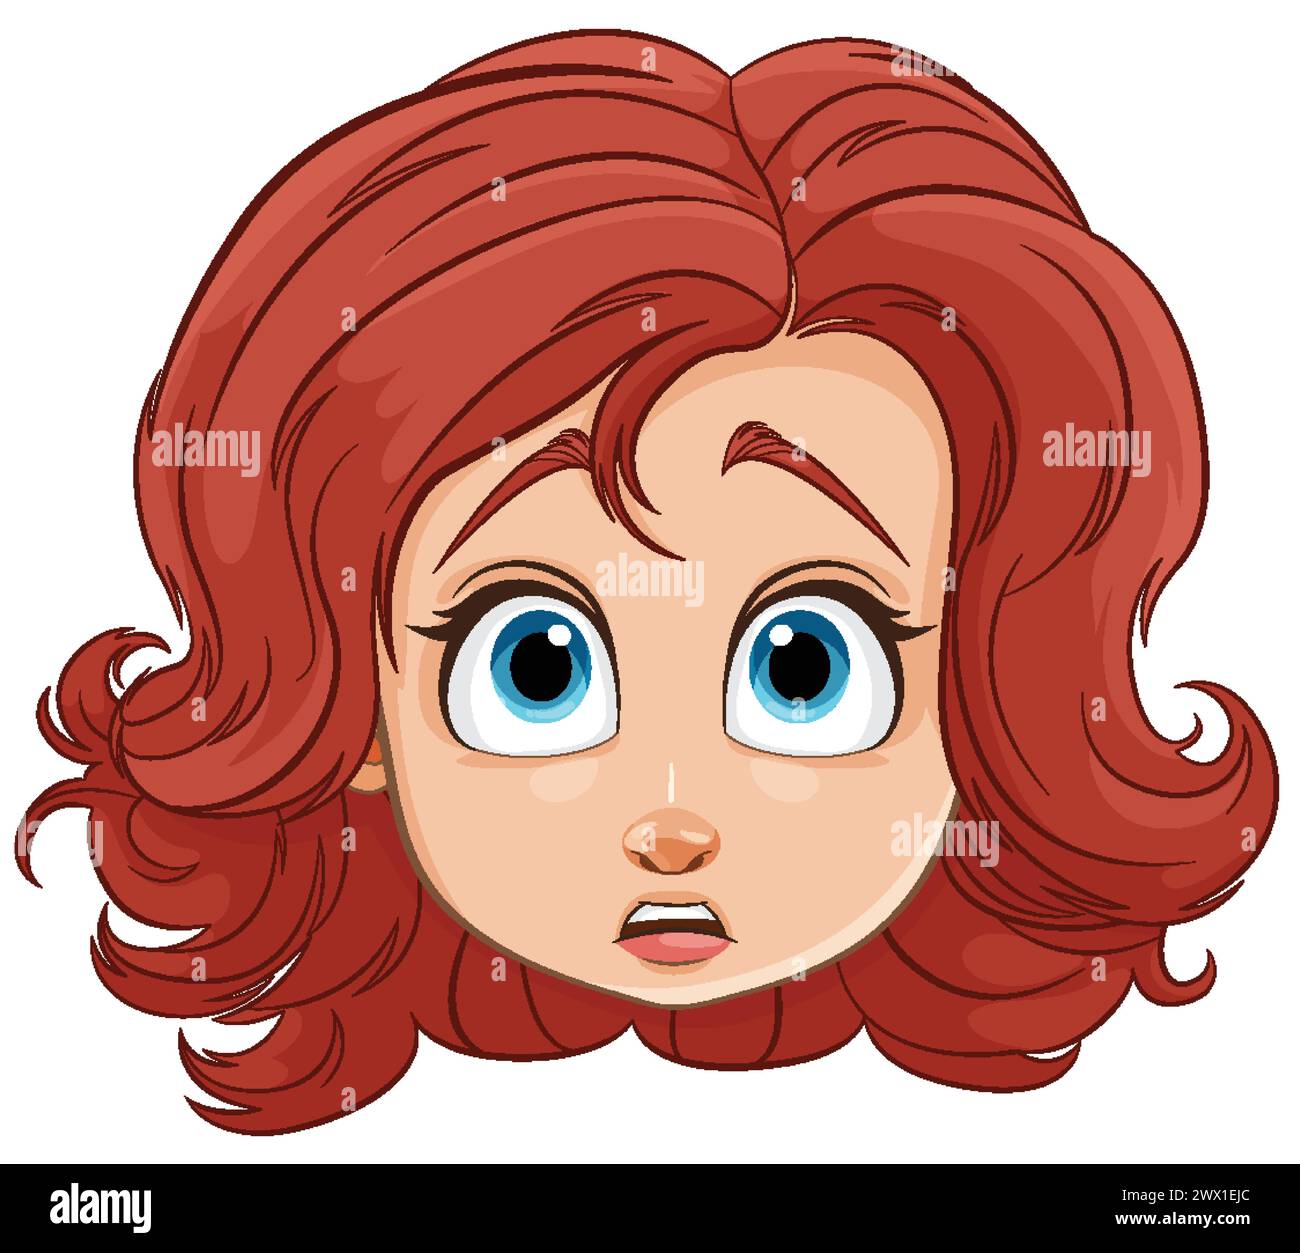 Vector illustration of a girl with a surprised expression Stock Vector